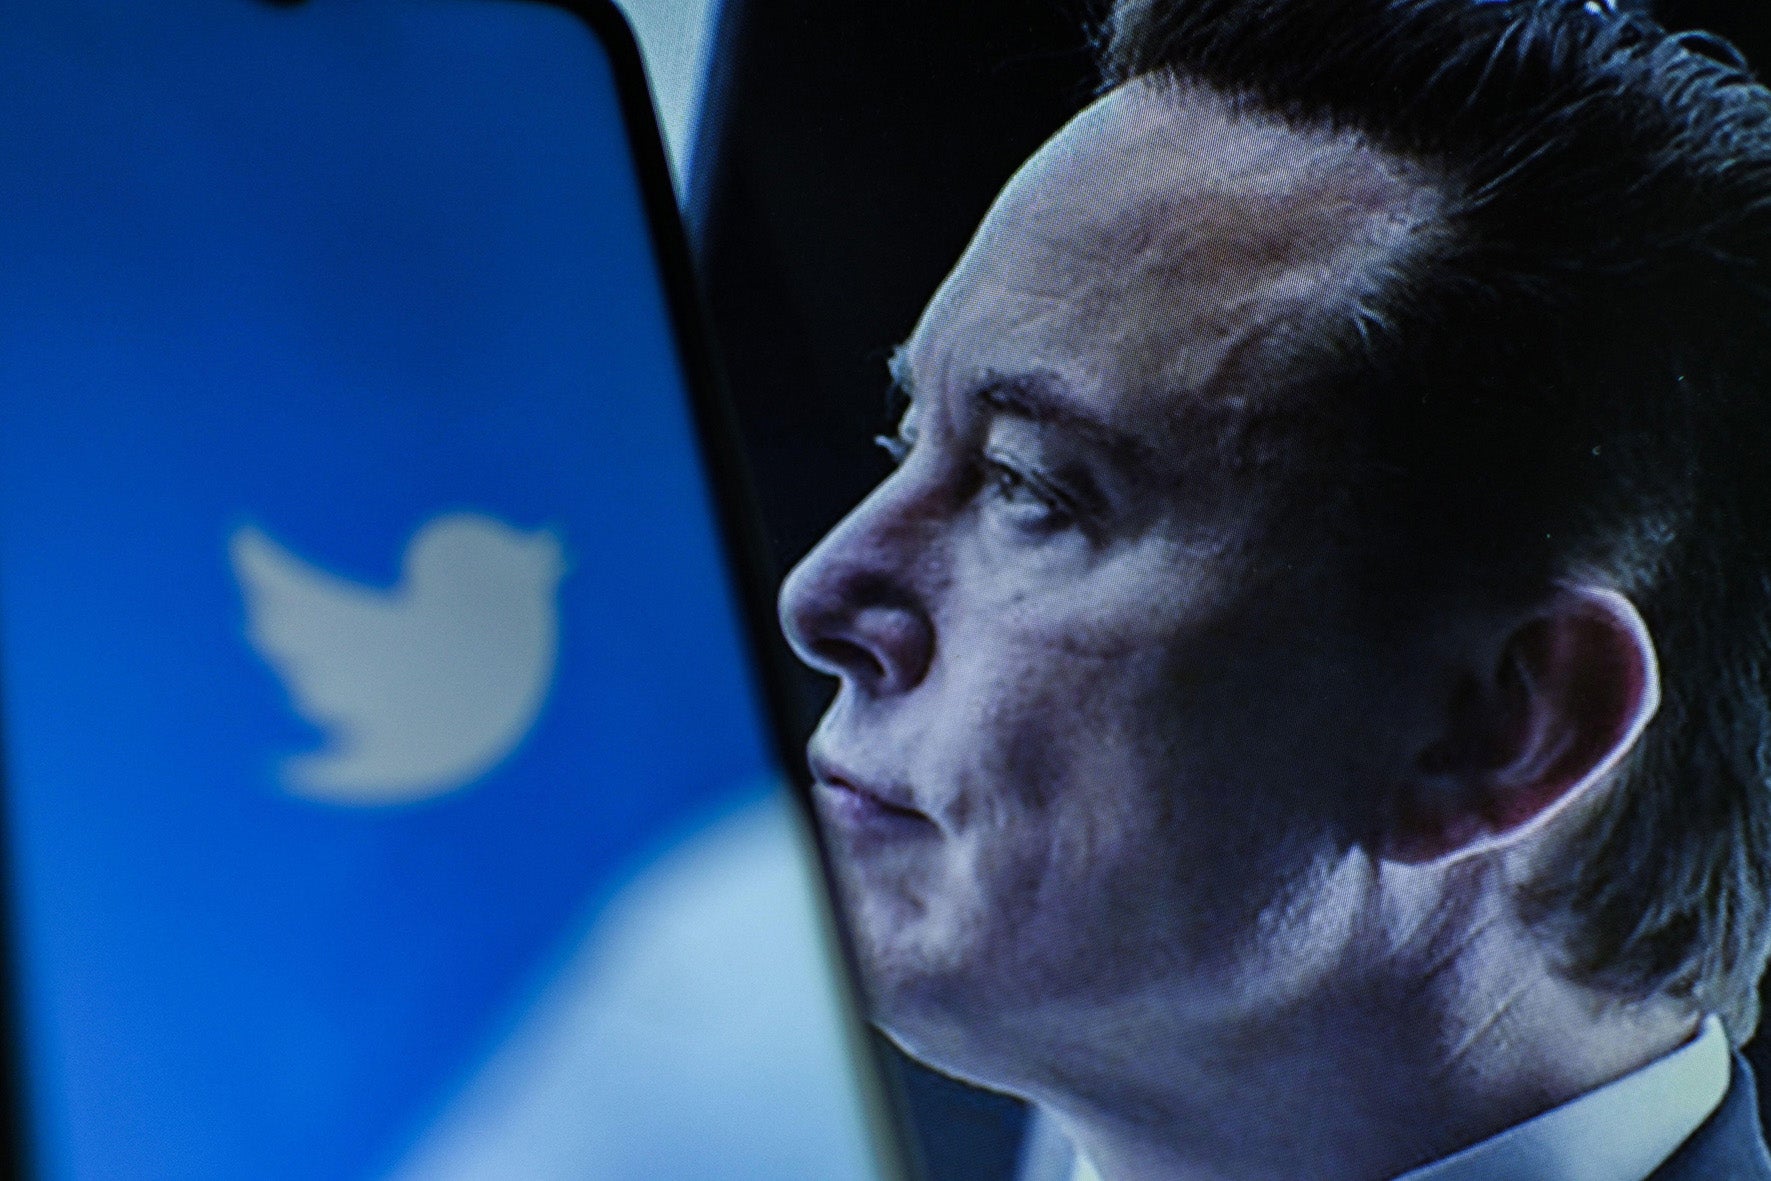 Elon Musk's Twitter takeover is about controlling attention